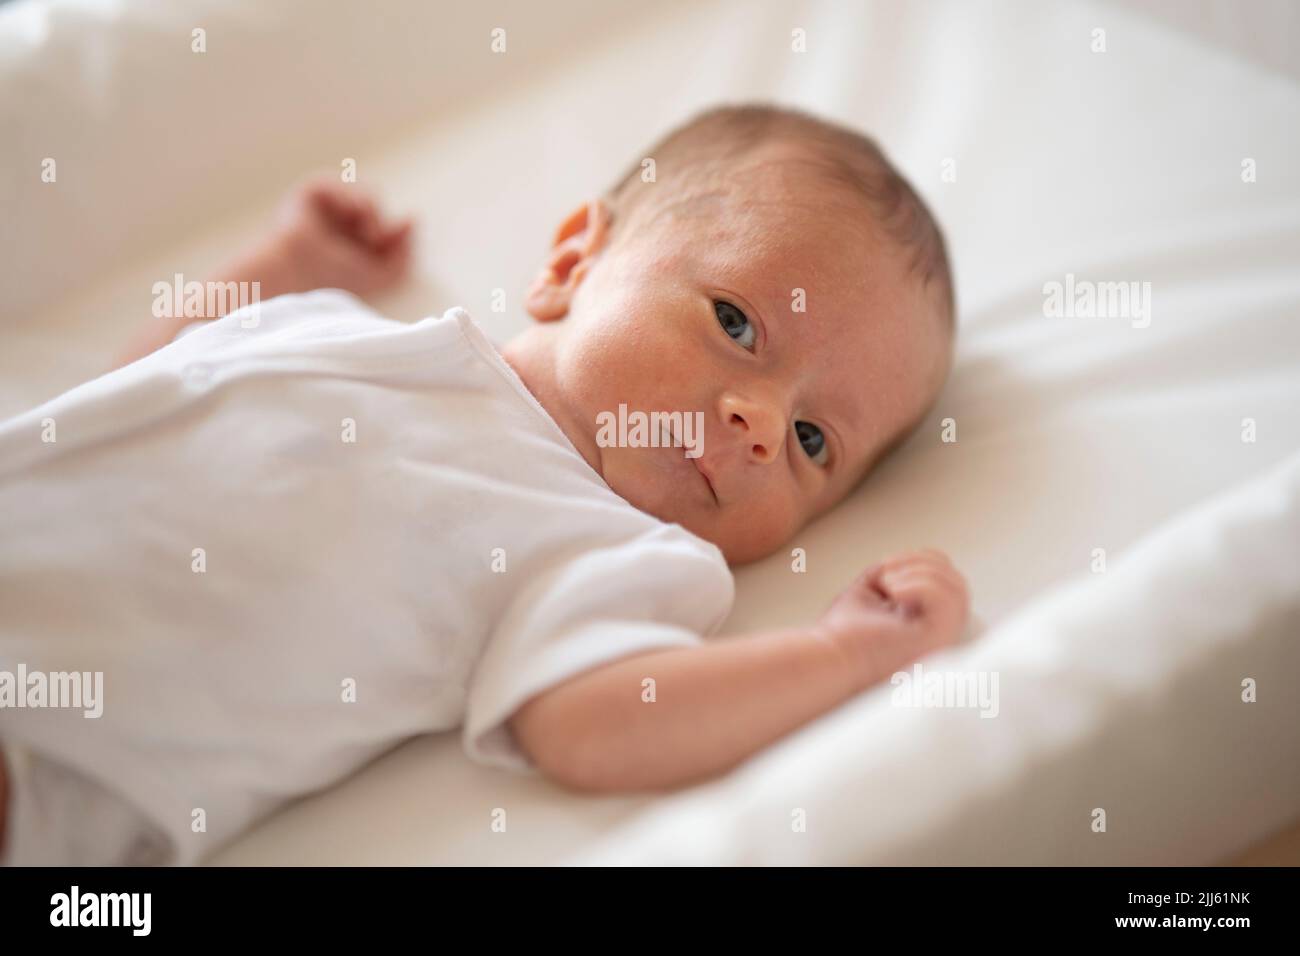 Cute baby looking at camera Banque D'Images